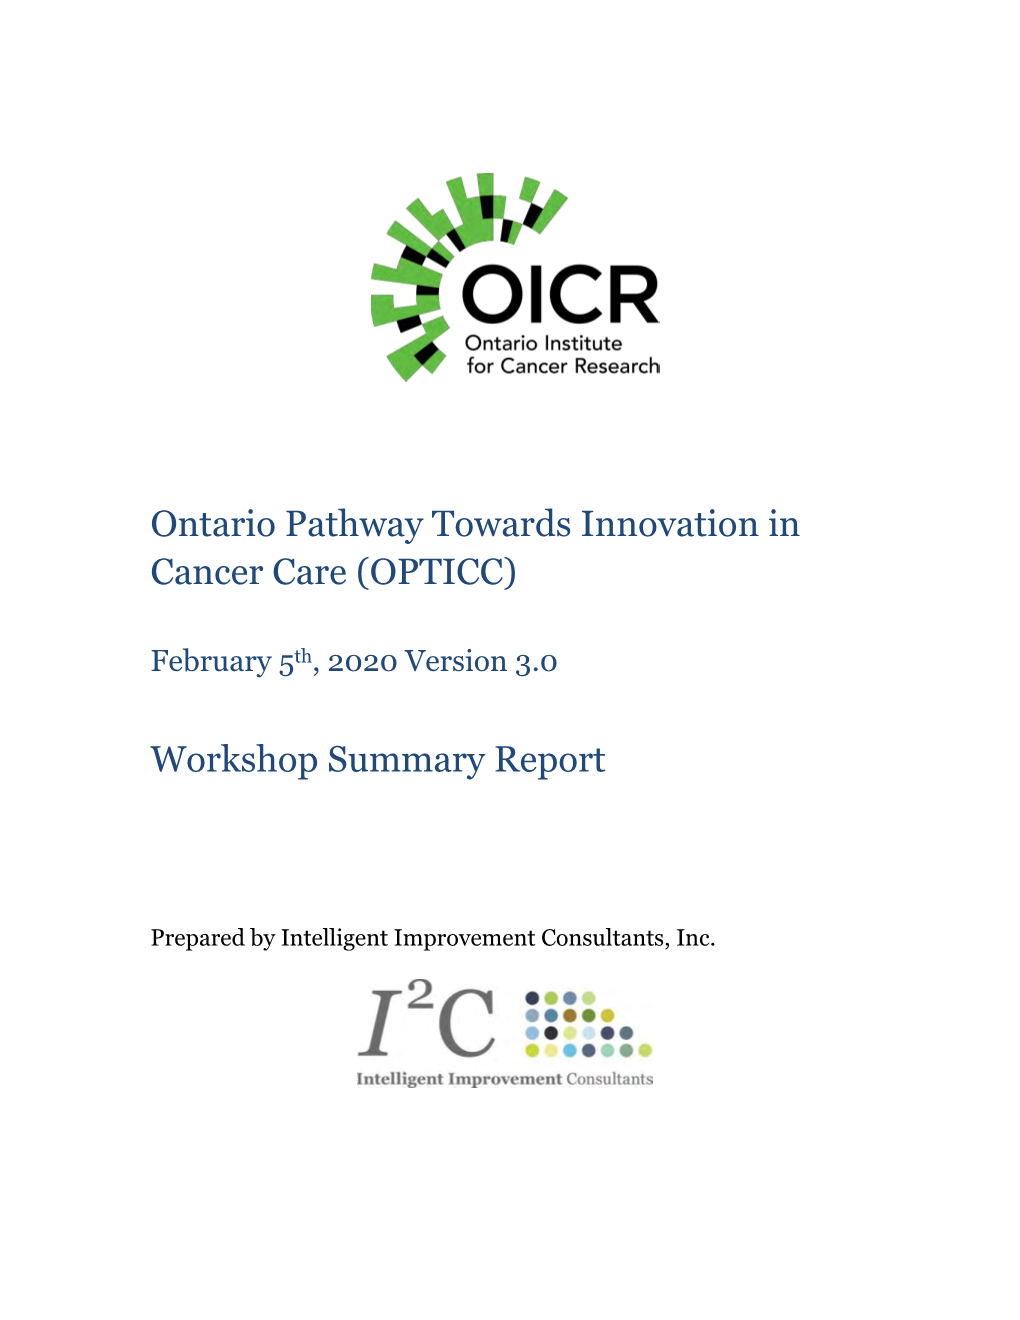 Ontario Pathway Towards Innovation in Cancer Care (OPTICC)